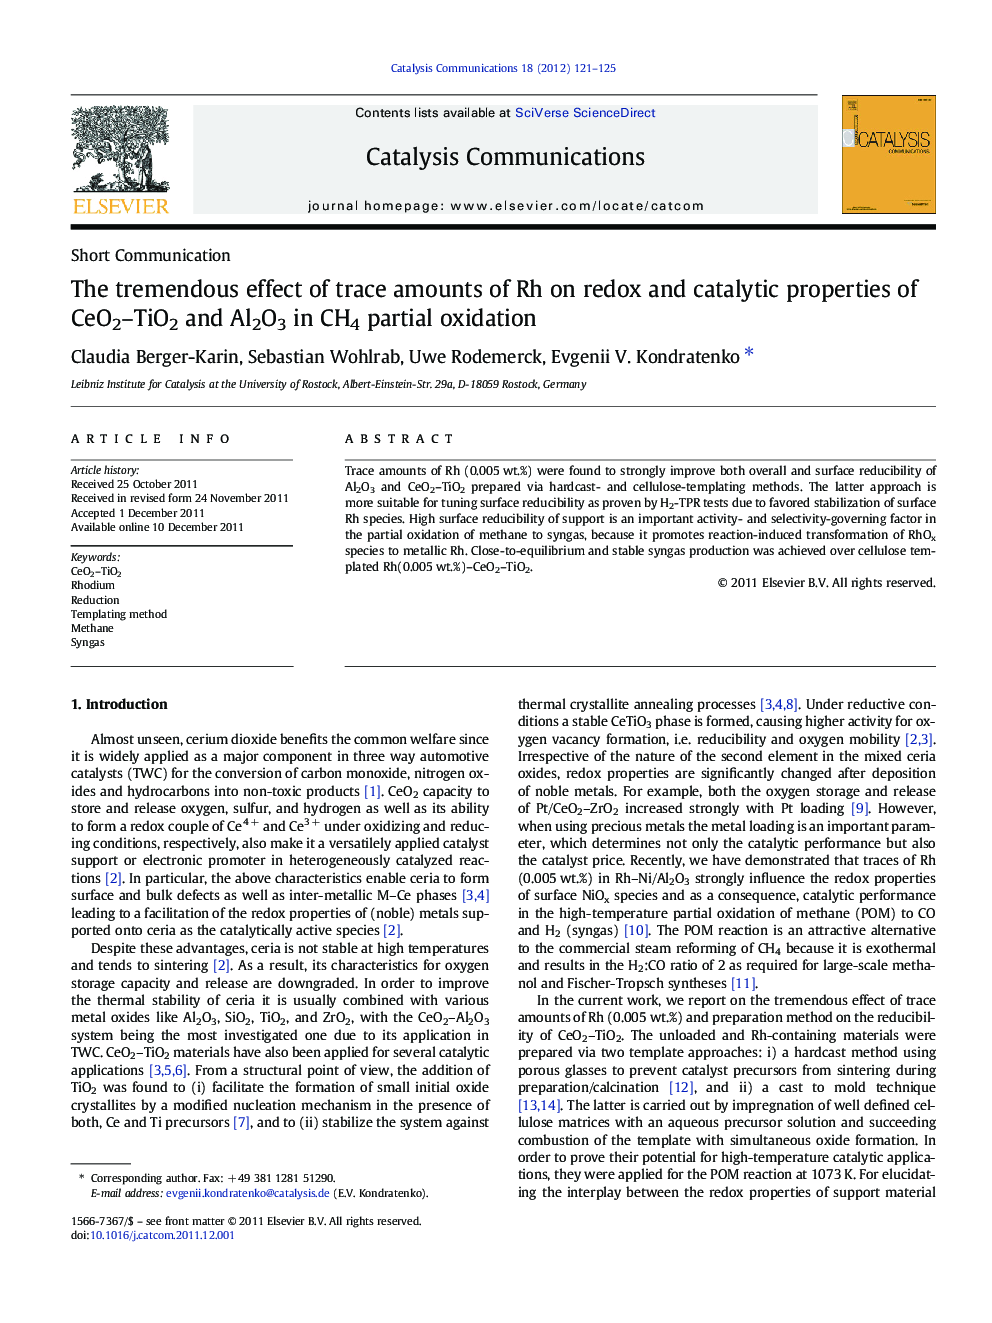 The tremendous effect of trace amounts of Rh on redox and catalytic properties of CeO2–TiO2 and Al2O3 in CH4 partial oxidation